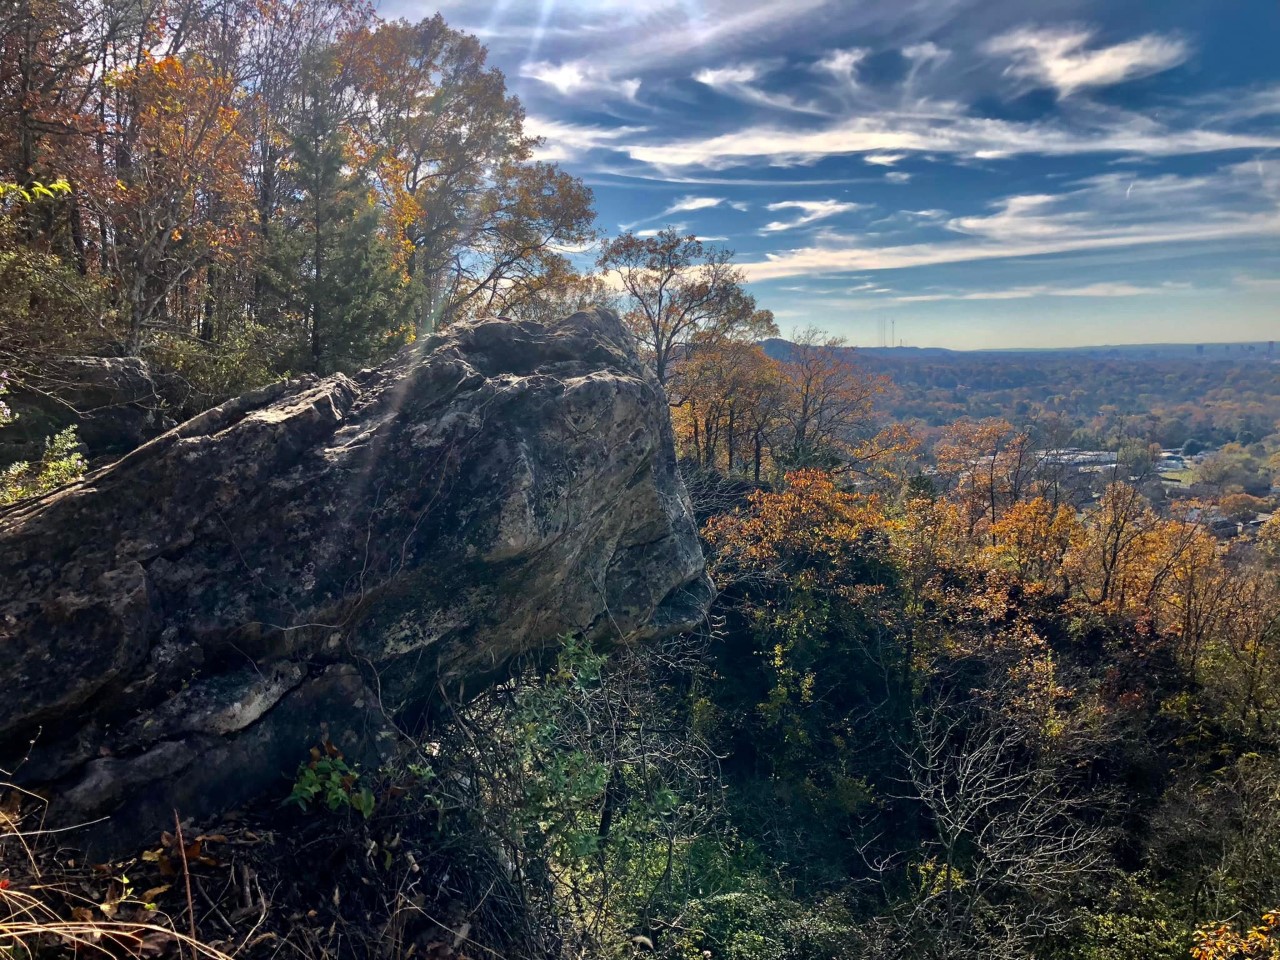 View at Ruffner Mountain